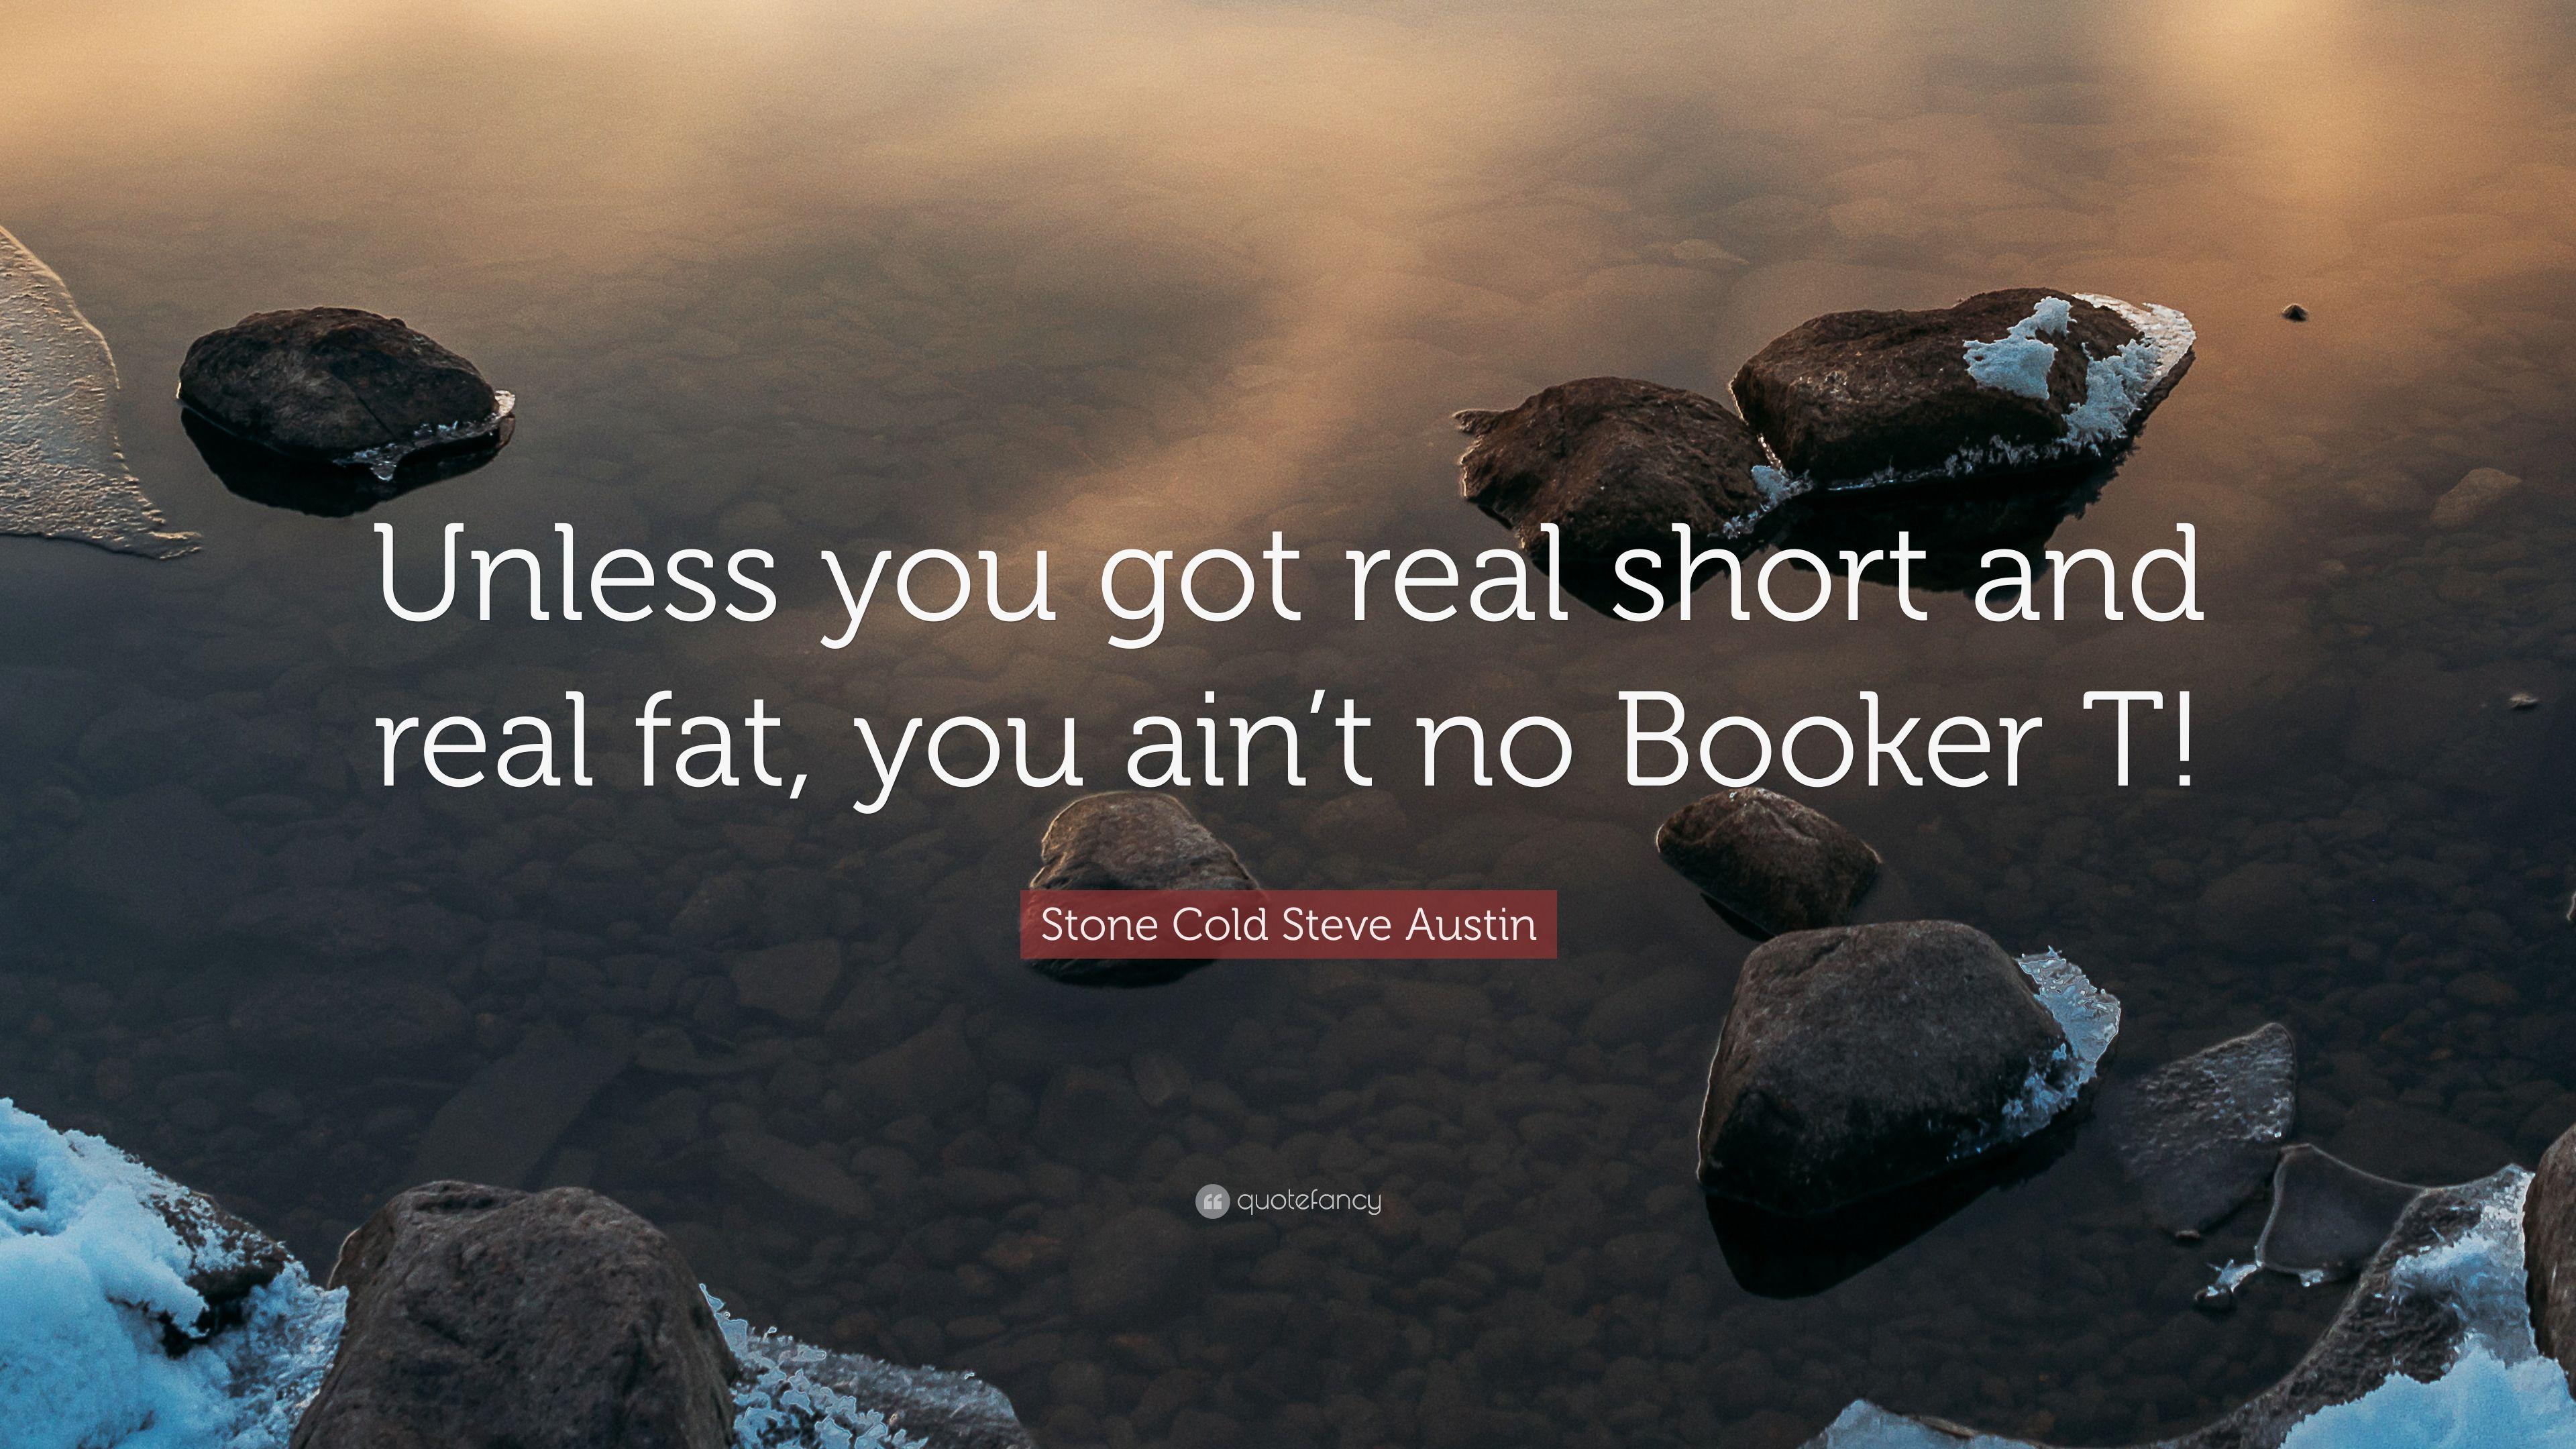 Stone Cold Steve Austin Quote: “Unless you got real short and real